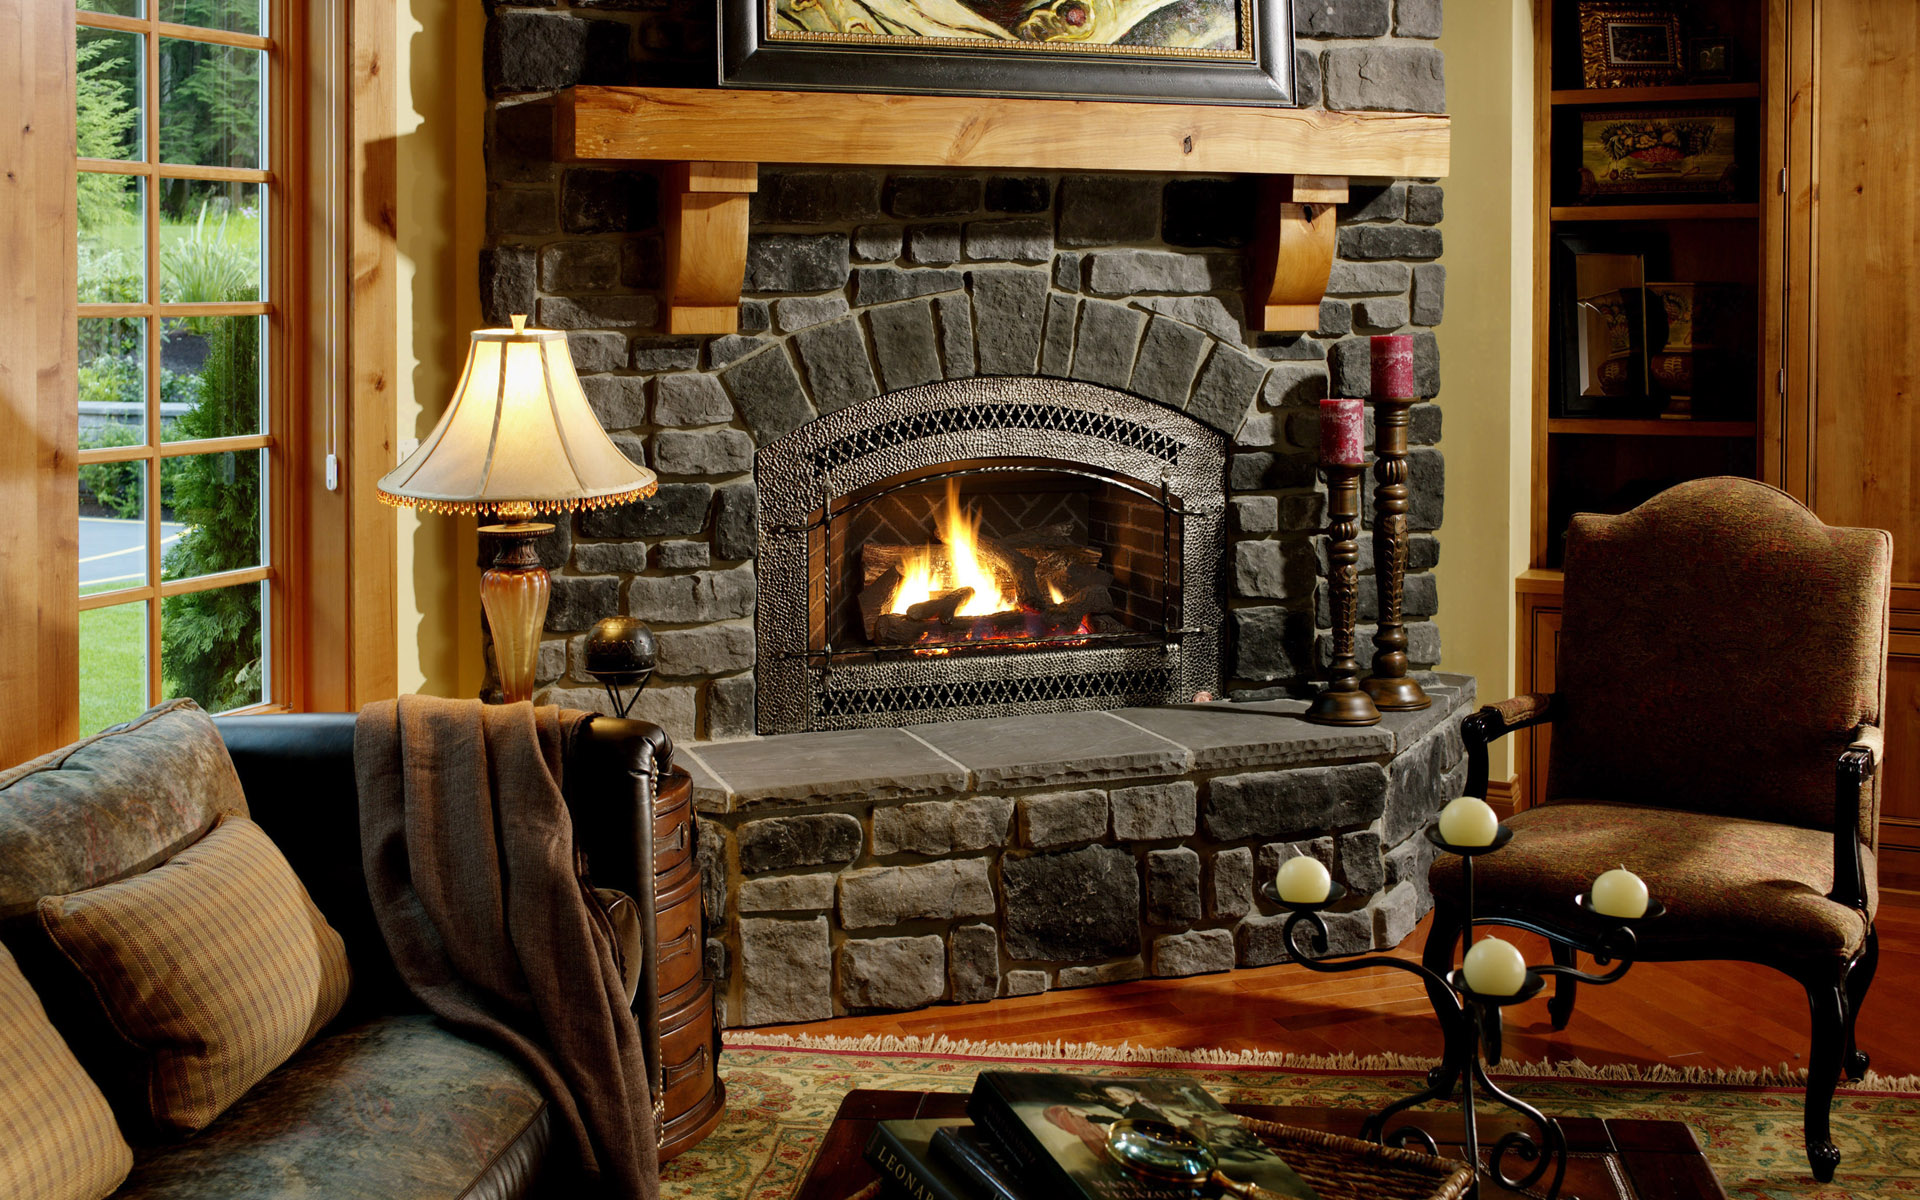 Home Fireplace Desktop Wallpaper Is A Great For Your